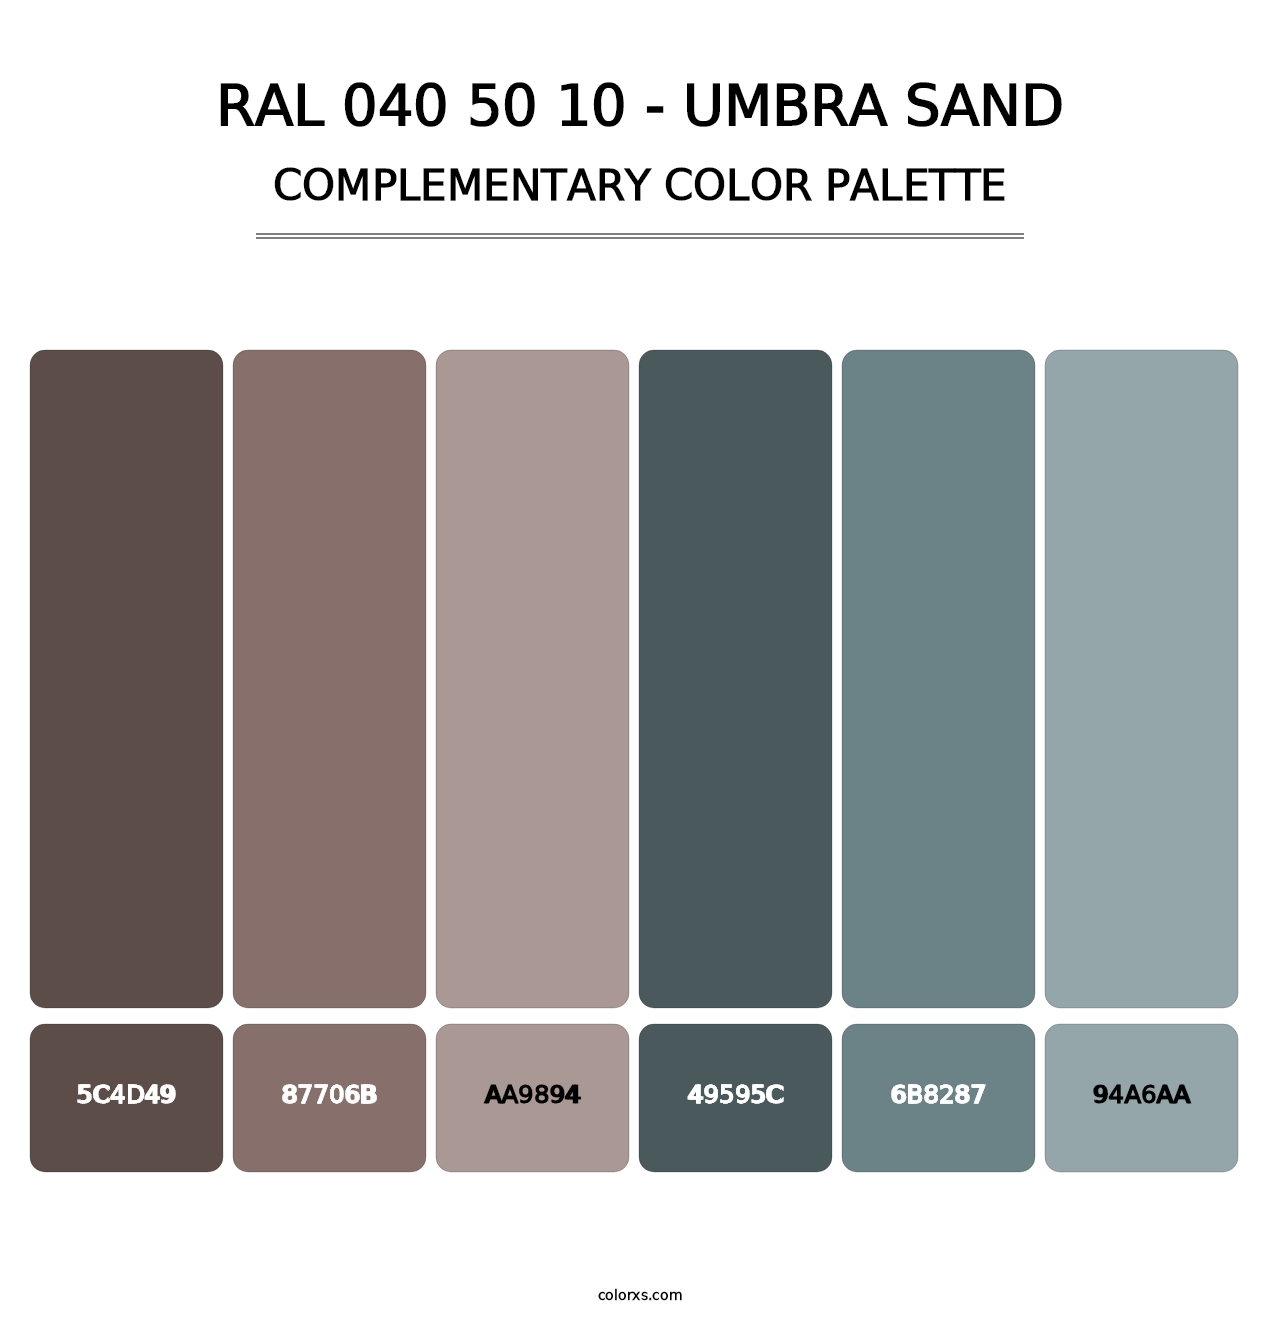 RAL 040 50 10 - Umbra Sand - Complementary Color Palette